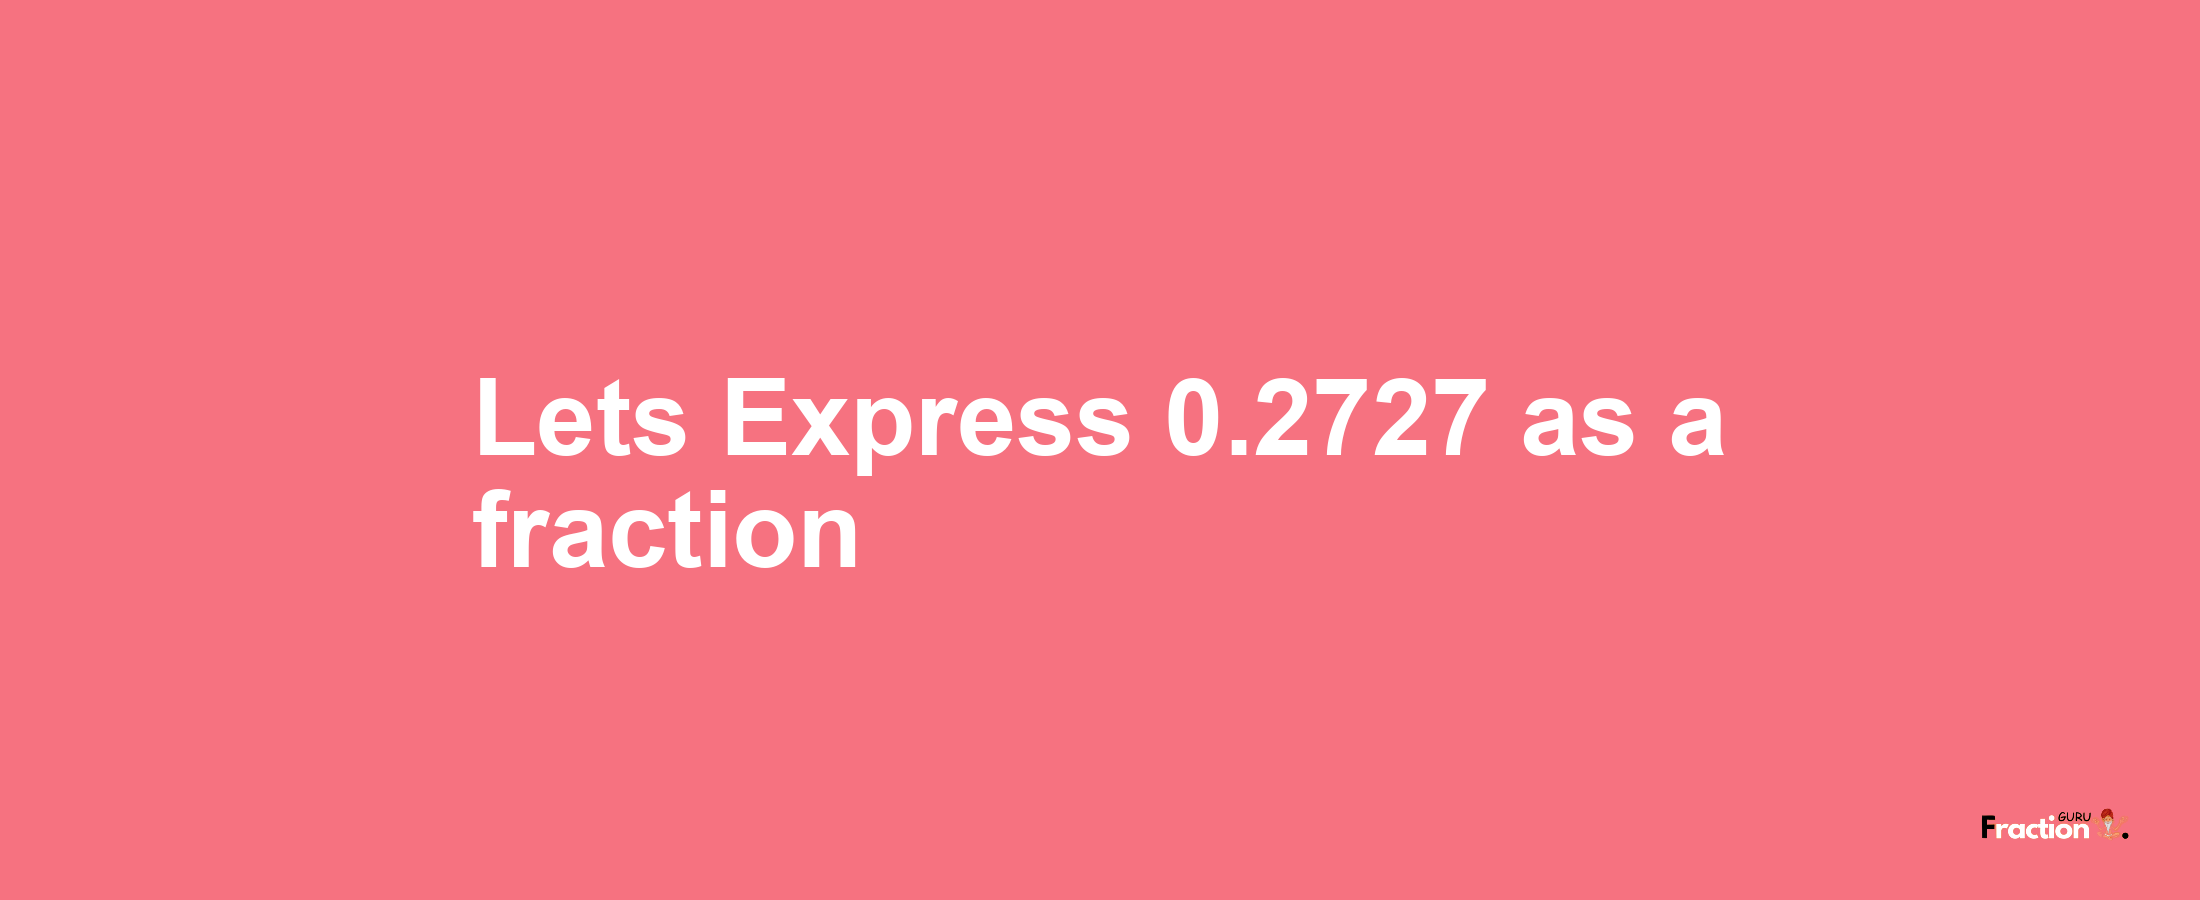 Lets Express 0.2727 as afraction